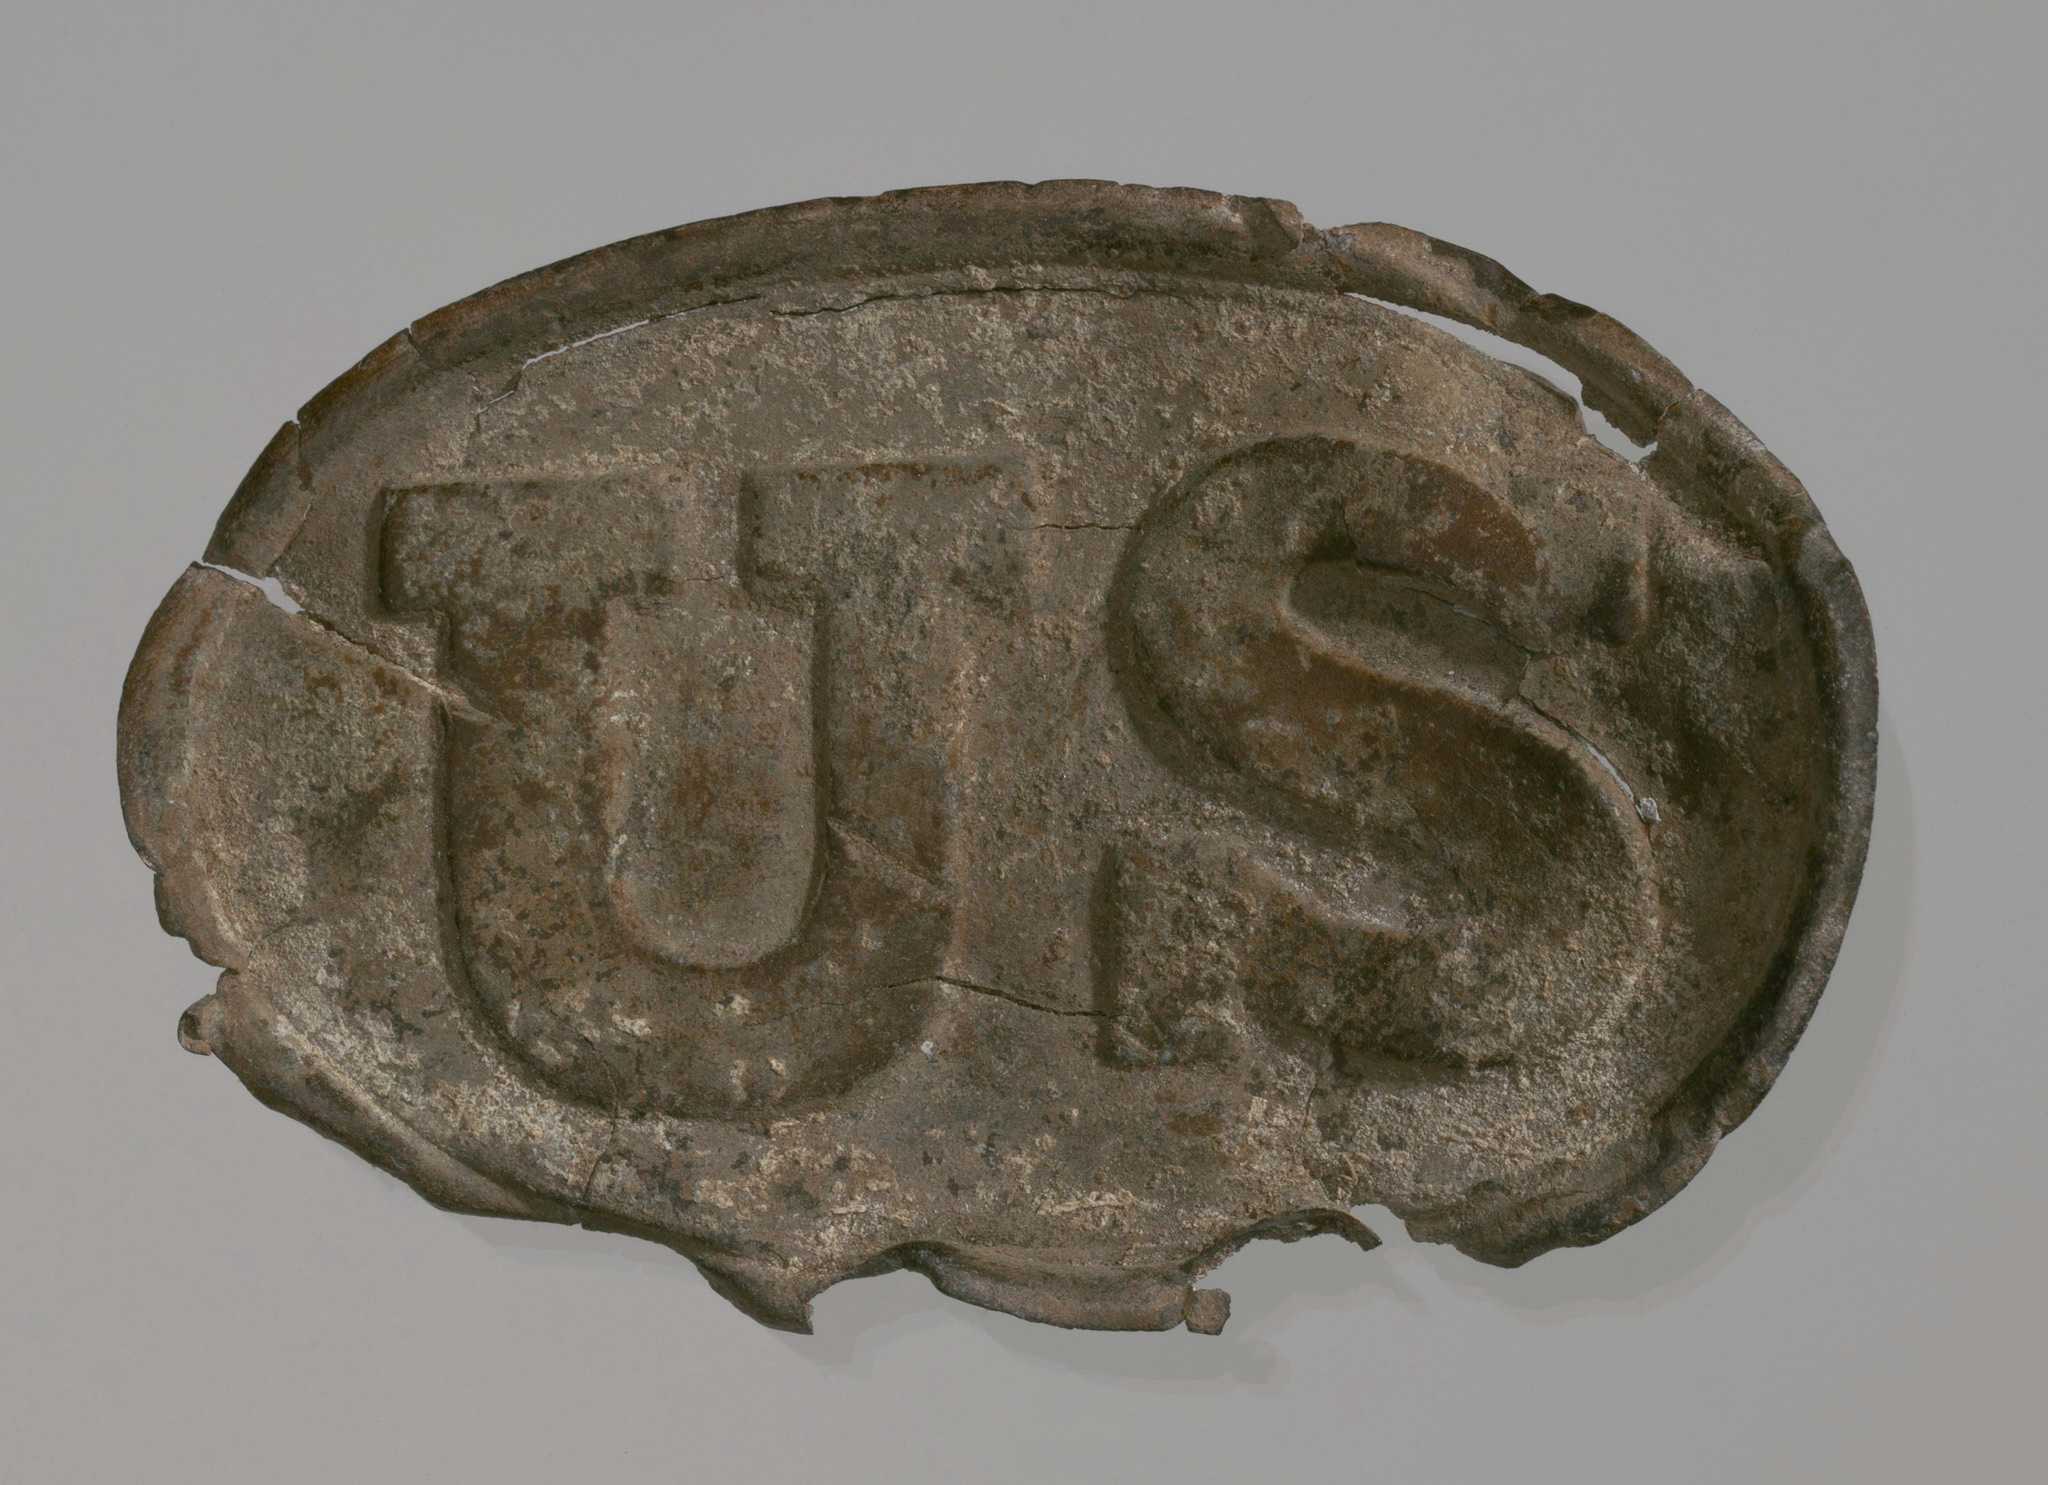 A metal Union belt buckle. The metal buckle is oval shaped with the raised lettering on the front that reads [US]. There are three hooks on the back. Any backmarks that may have existed were worn away by the elements.